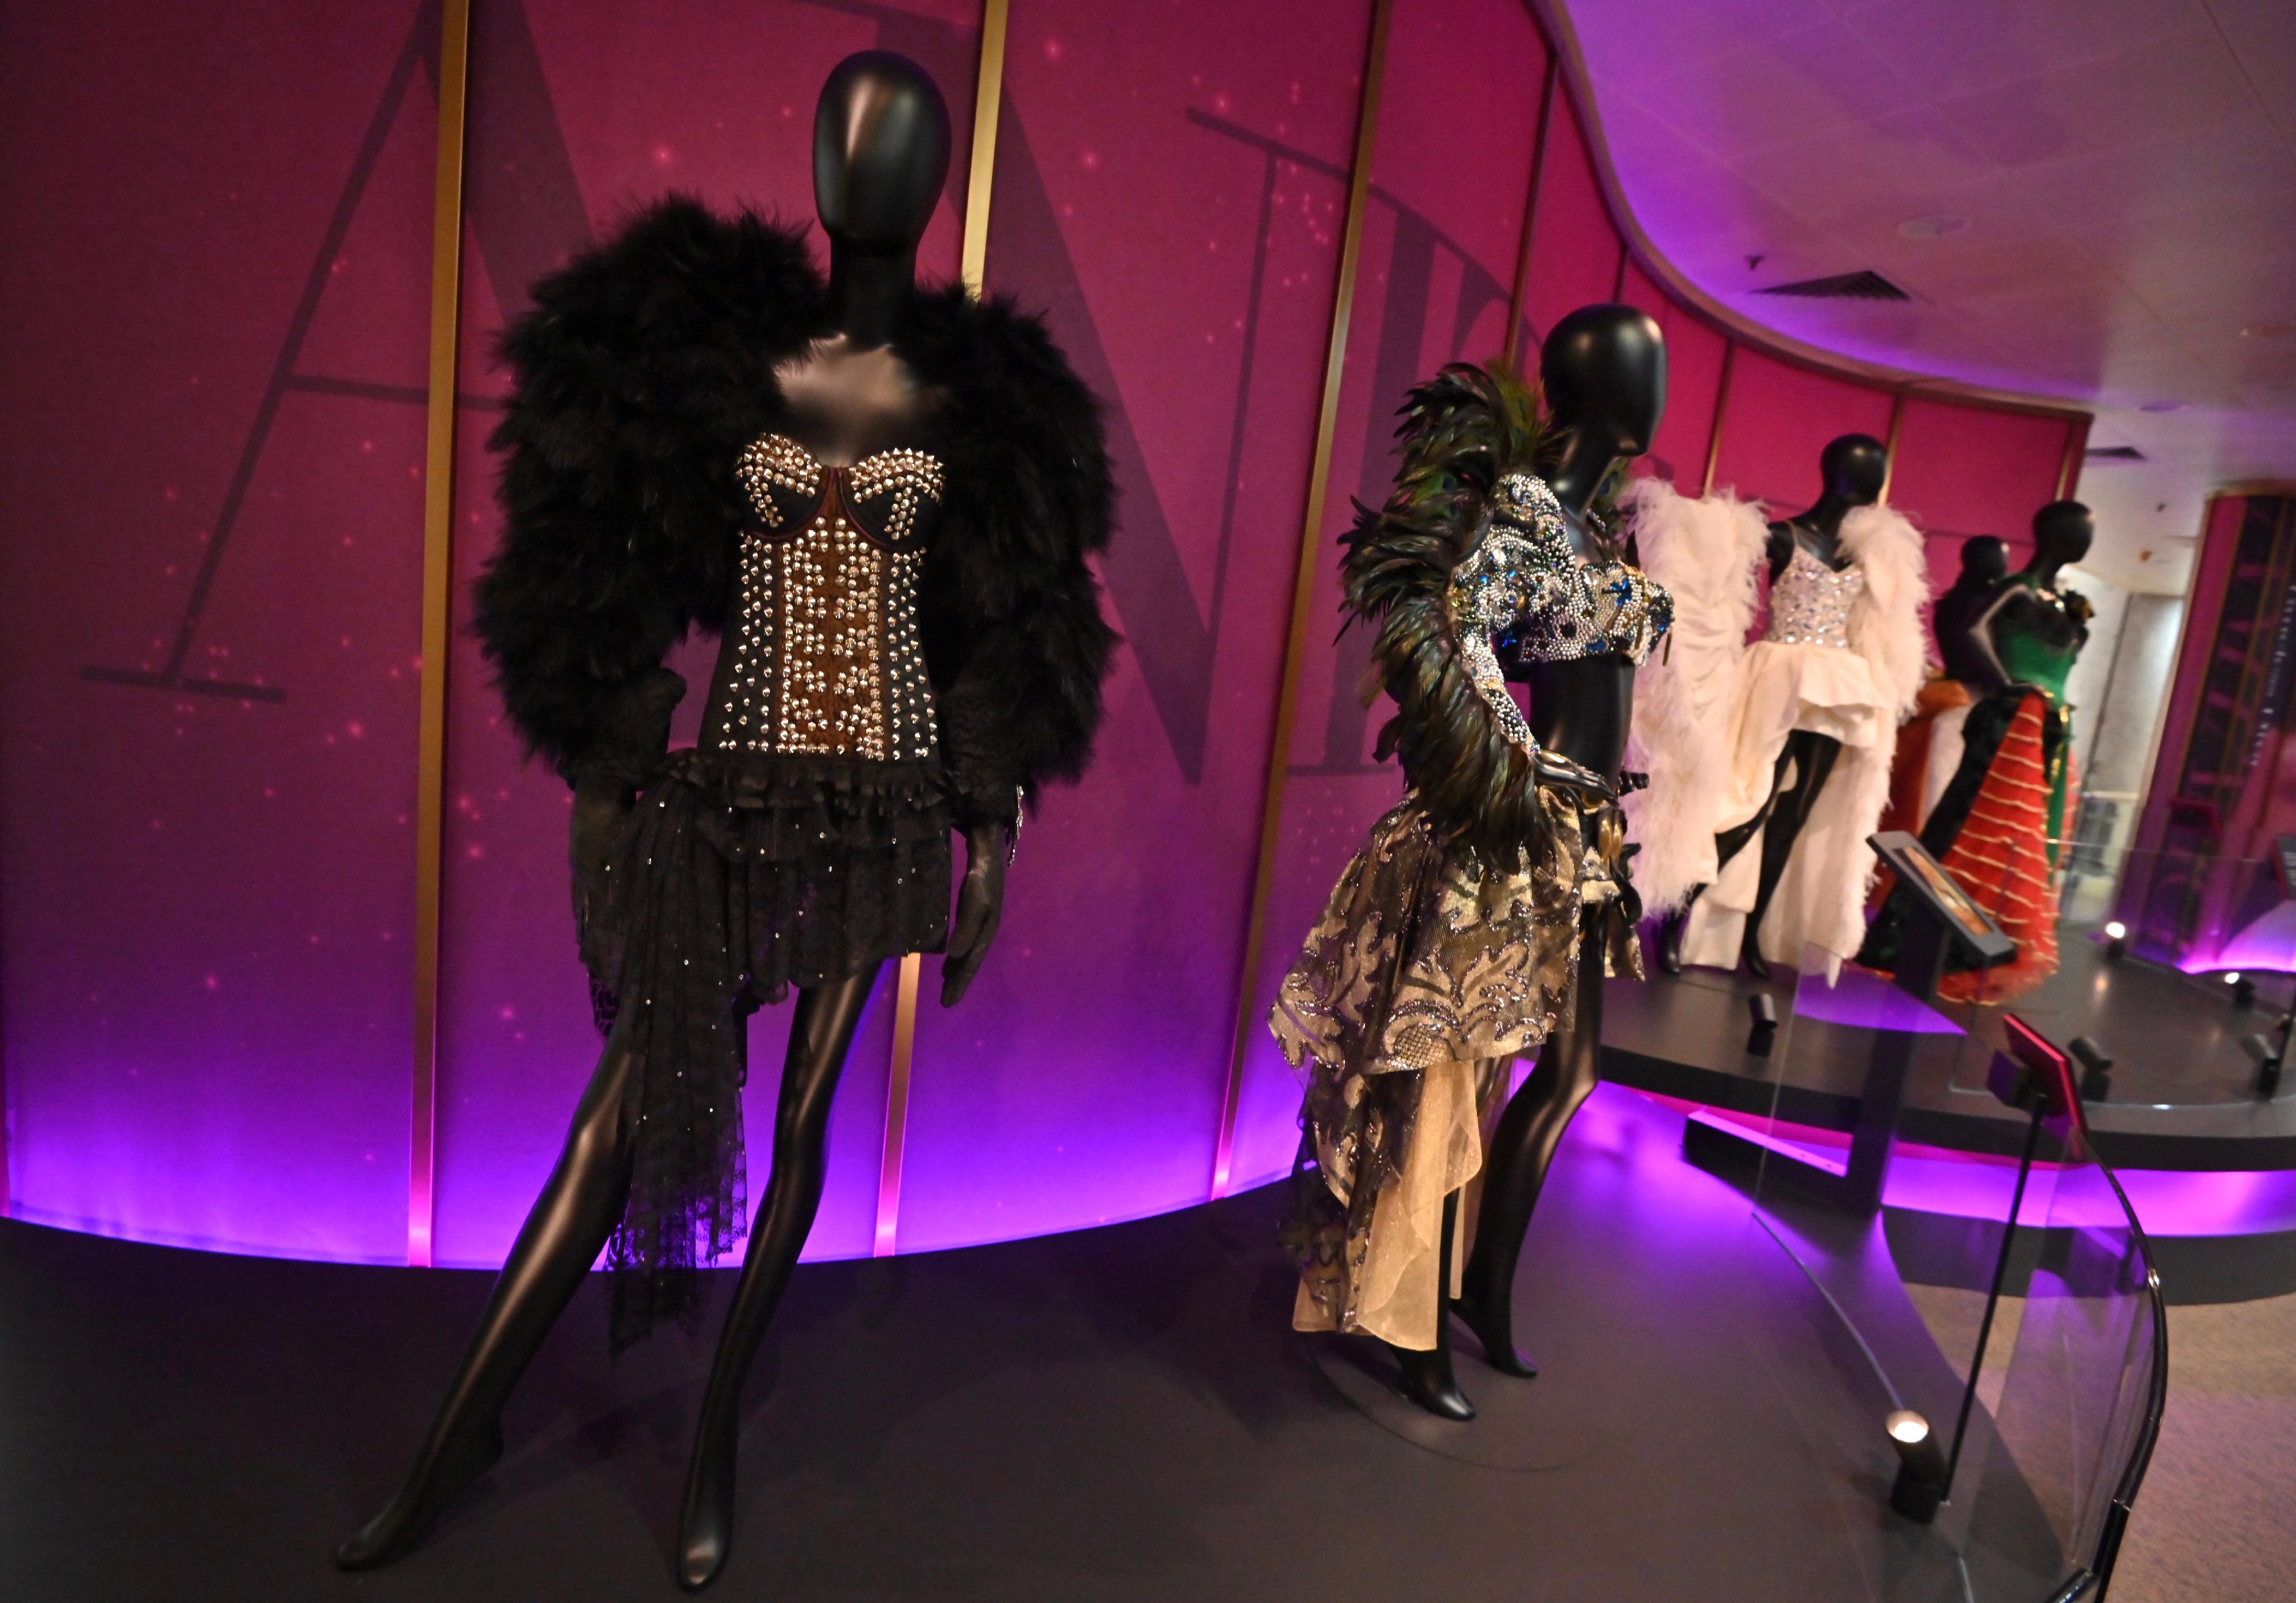 The opening ceremony for the "Timeless Diva: Anita Mui" exhibition was held today (December 23) at the Hong Kong Heritage Museum. Photo shows the classic stage costumes worn by Anita Mui.